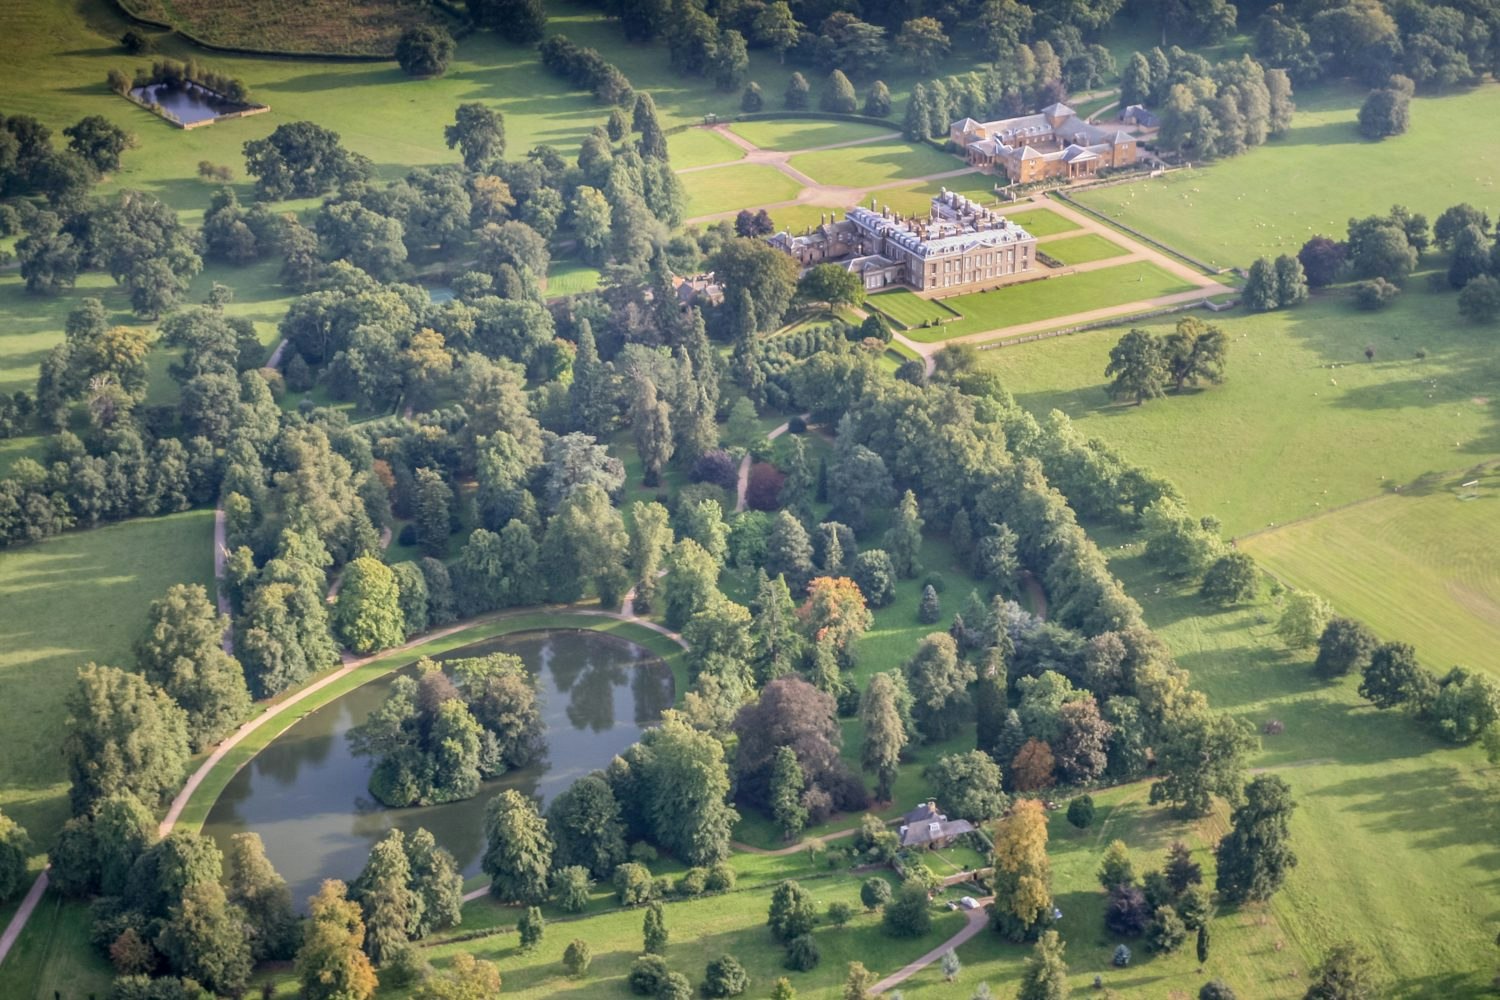 An aerial view of Althorp House, home of the Spencer family